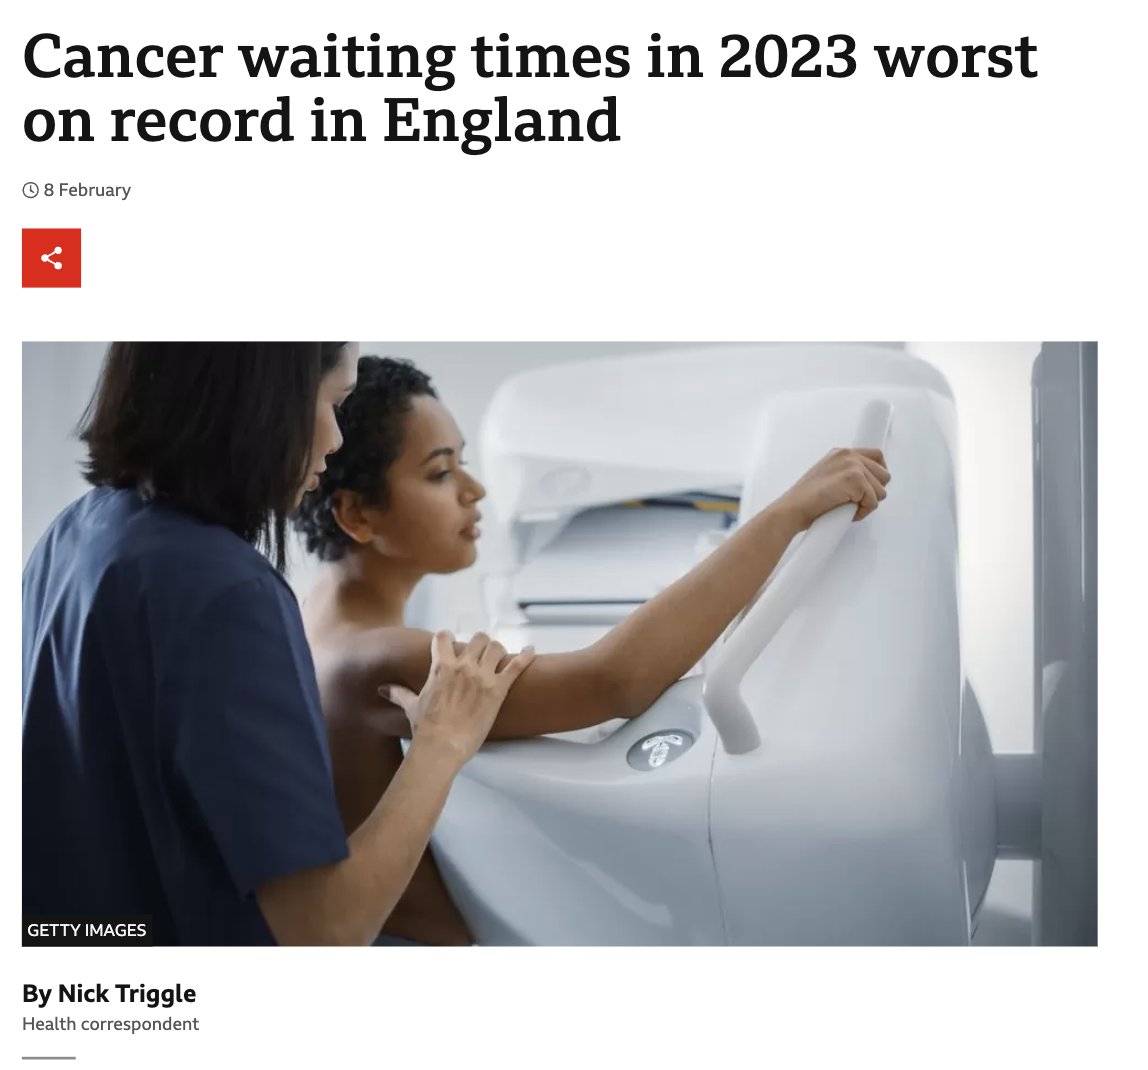 NHS England should focus on rectifying horrific cancer waiting times rather than using their vast resources in attempt to spy on, censor and discredit me. It is truly pathetic. Placing organisational reputation ahead of patient care, again - such warped priorities.